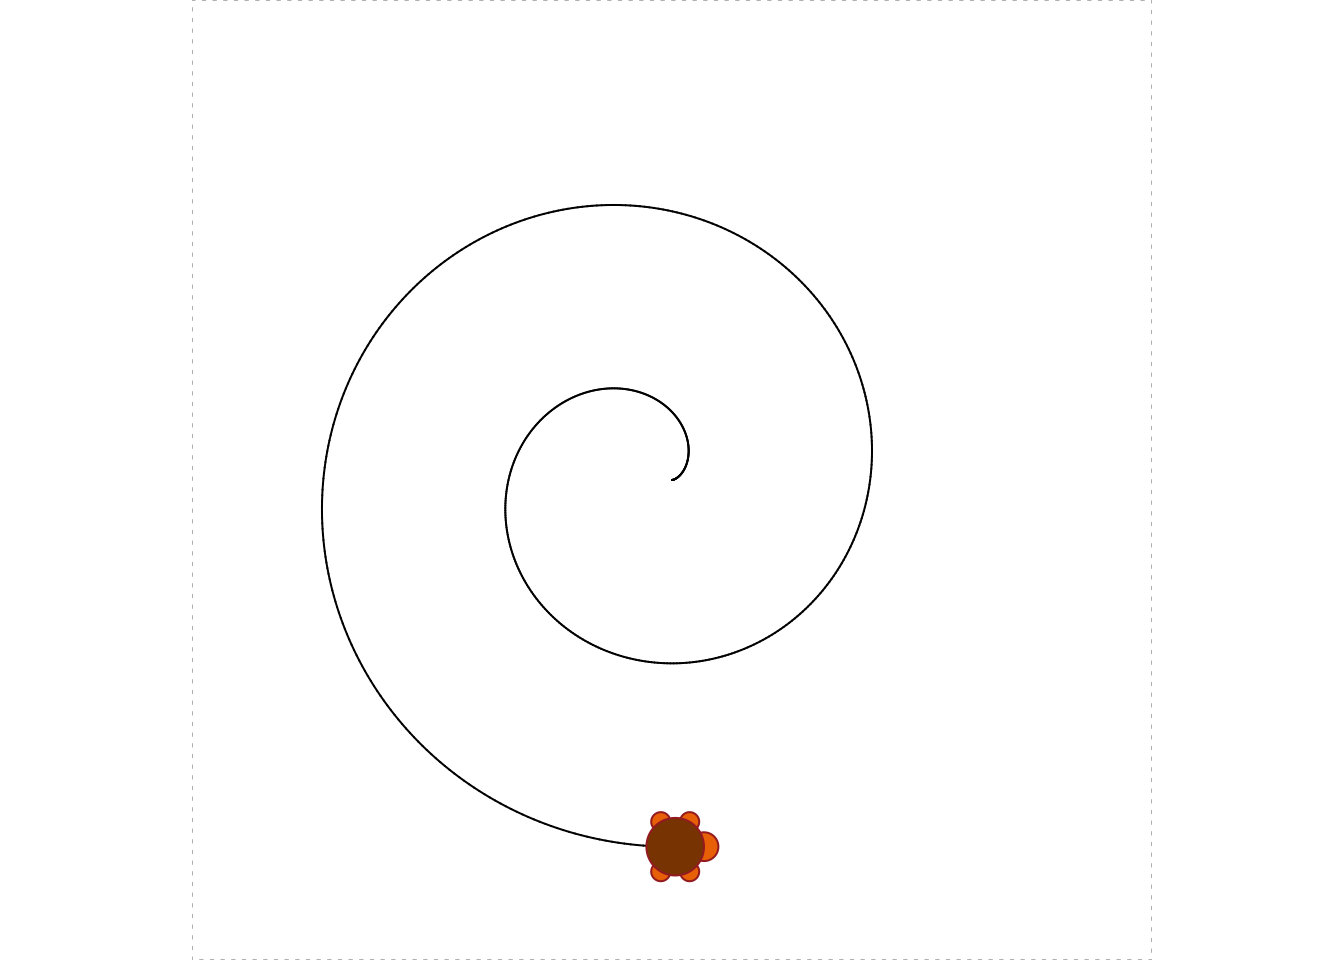 Using a loop to make a spiral.